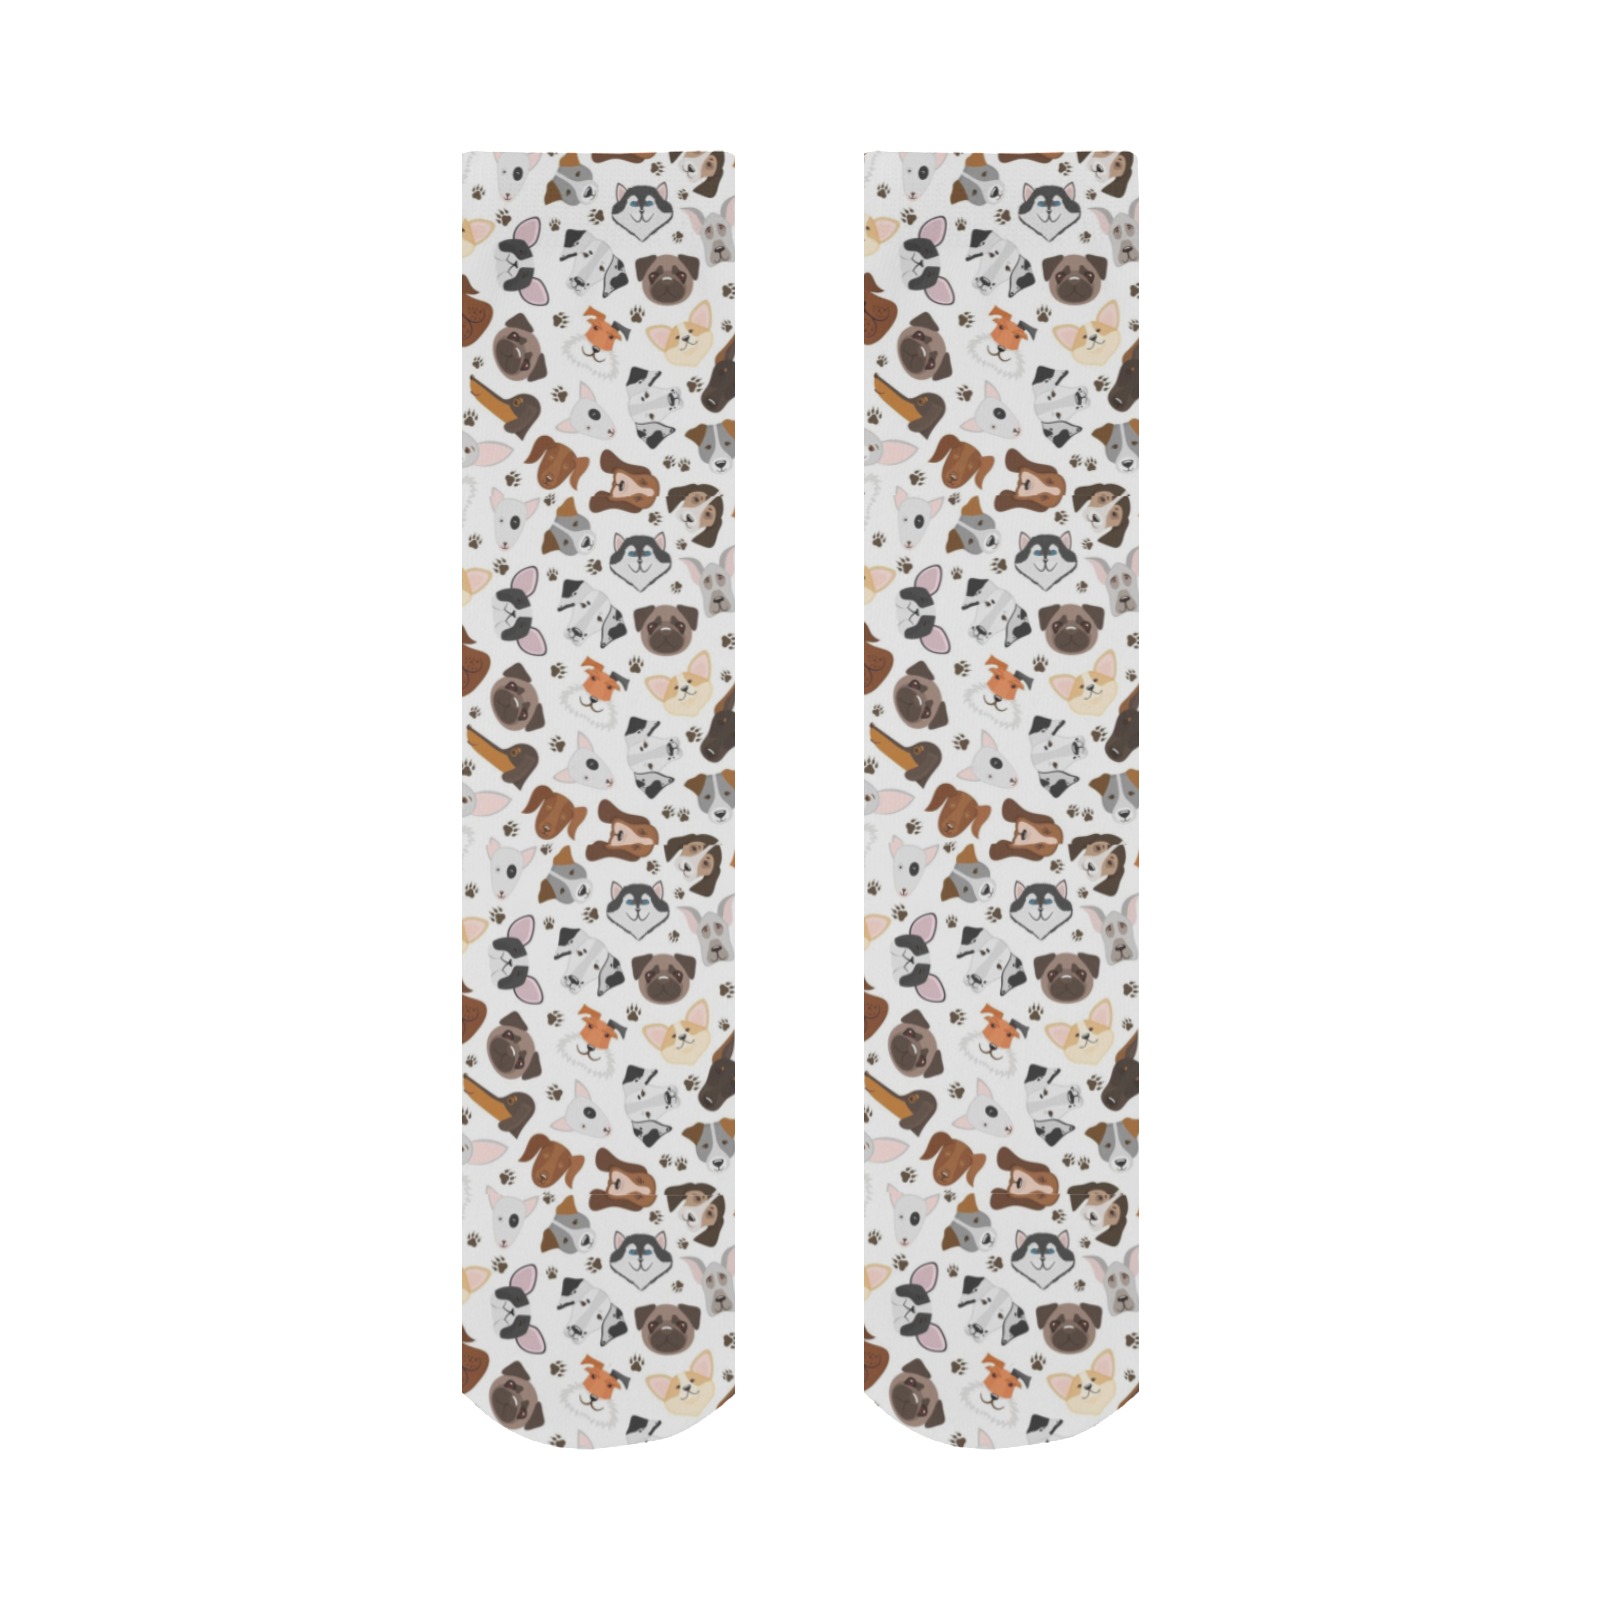 Cute Puppy Mixed Breed Pattern All Over Print Socks for Women